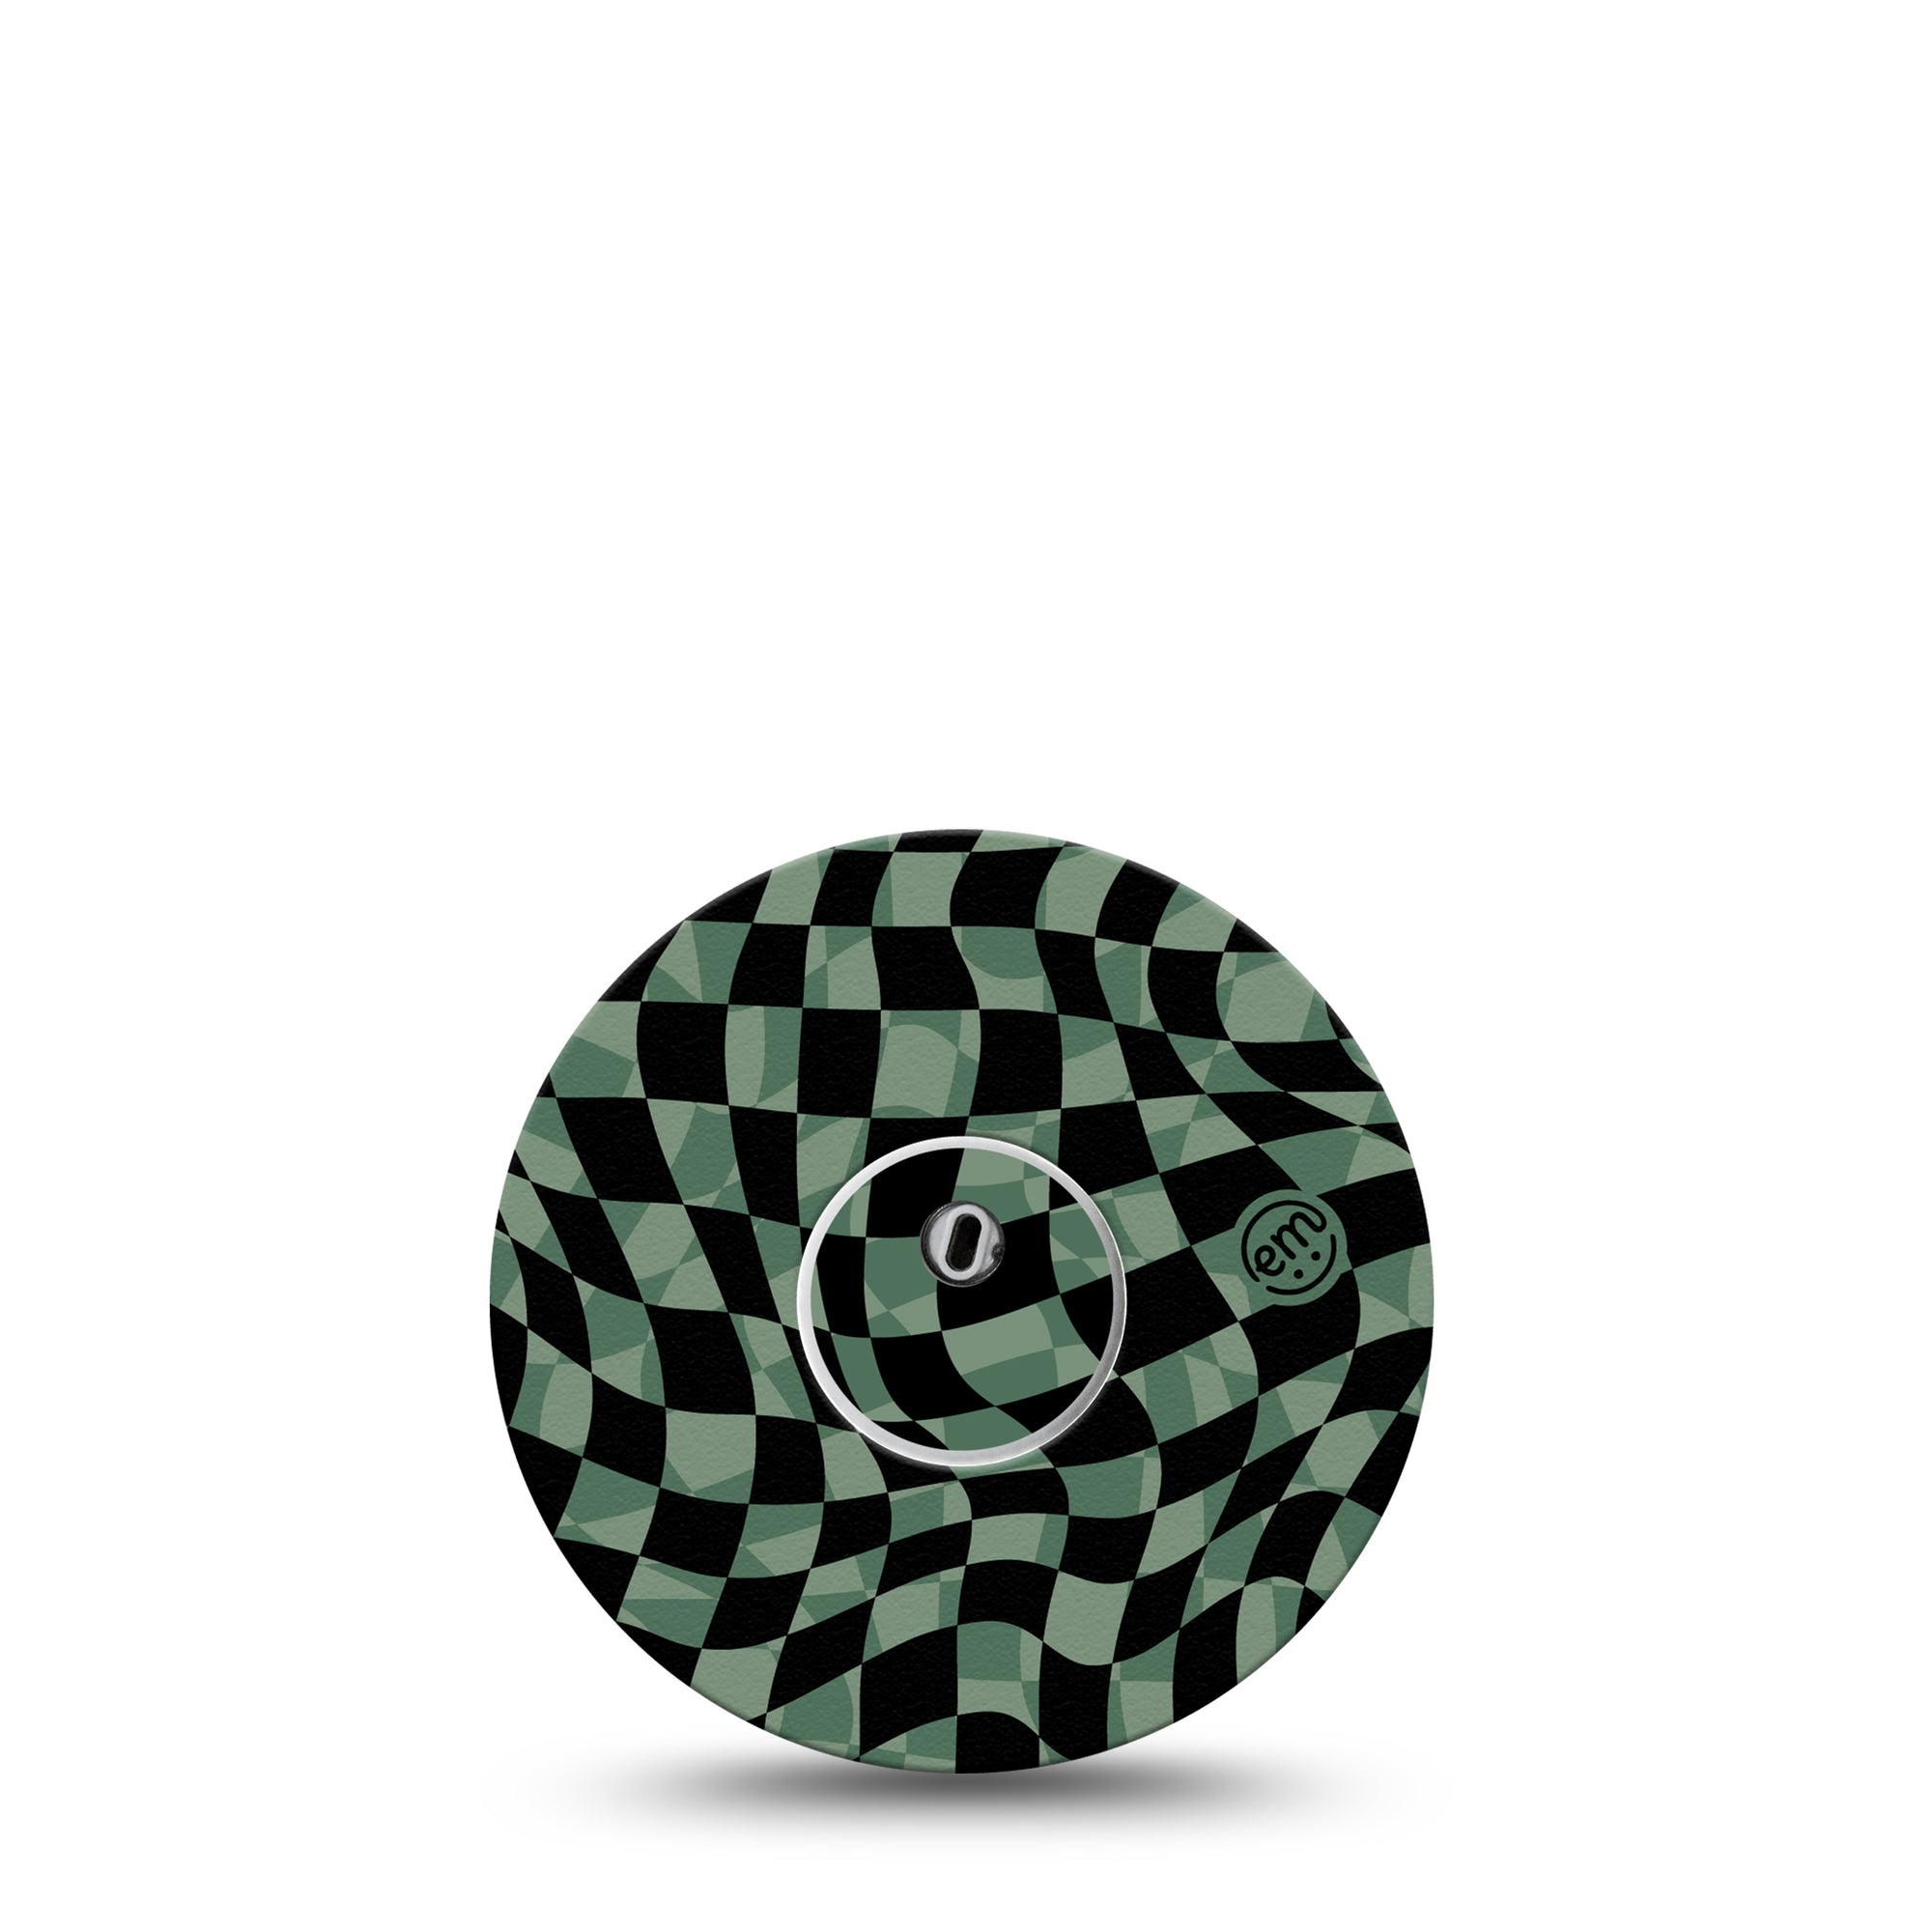 ExpressionMed Green & Black Checkerboard Libre 3 Transmitter Sticker with Matching Libre 3 Checkered Illusion Design Inspired CGM Plaster Patch